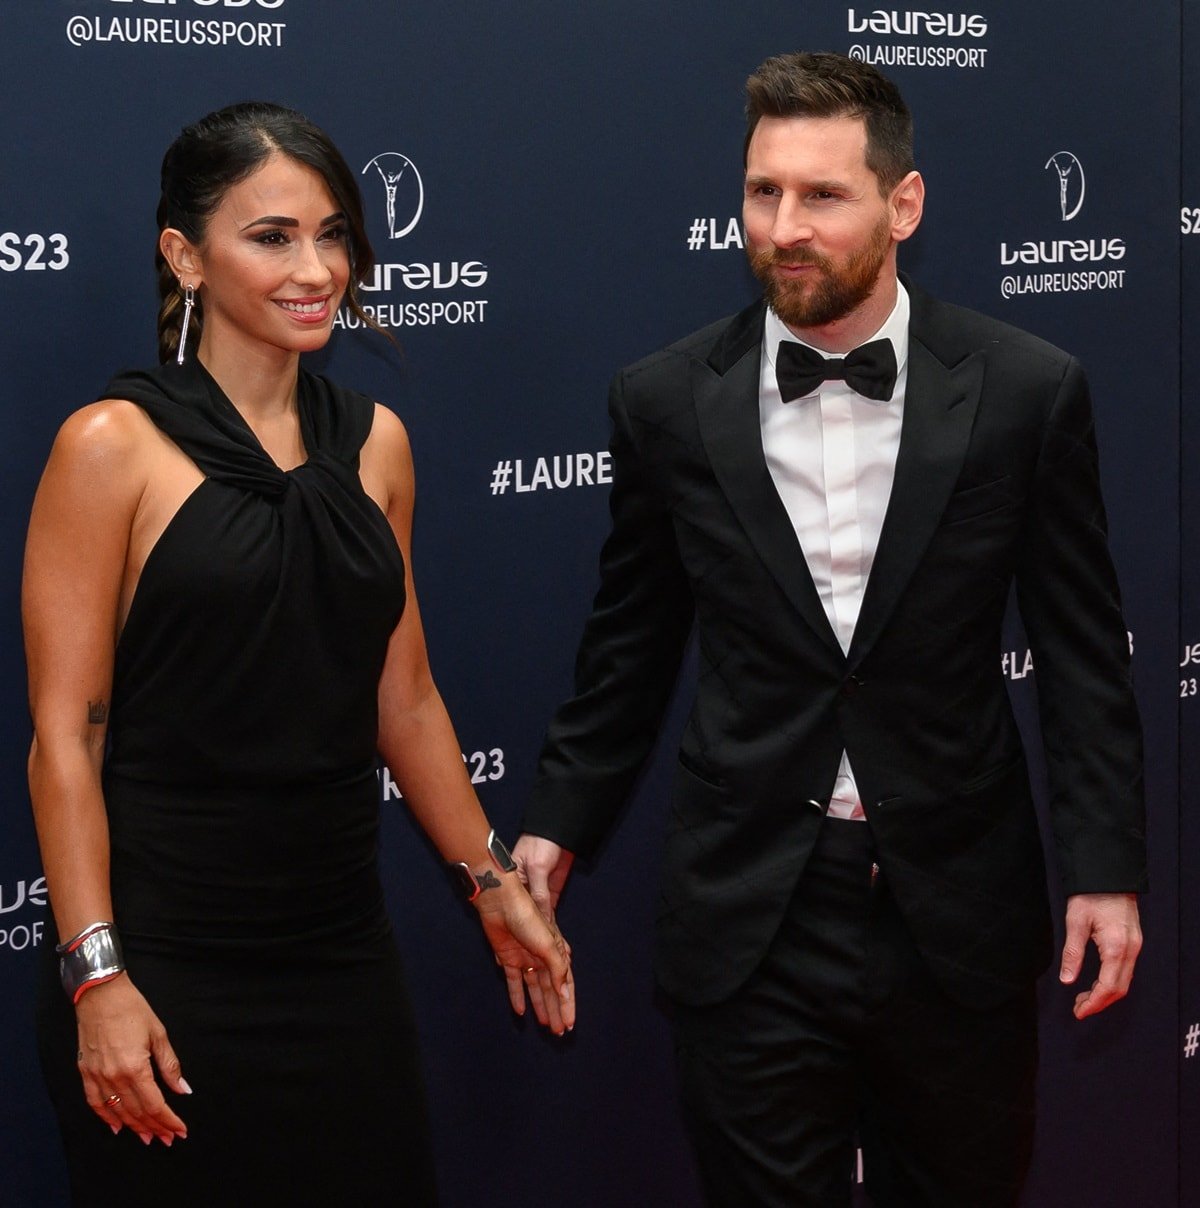 Lionel Messi has been happily married to his childhood sweetheart, Antonela Roccuzzo, since June 2017, and together they have three children - Thiago, Mateo, and Ciro - born in 2012, 2015, and 2018 respectively